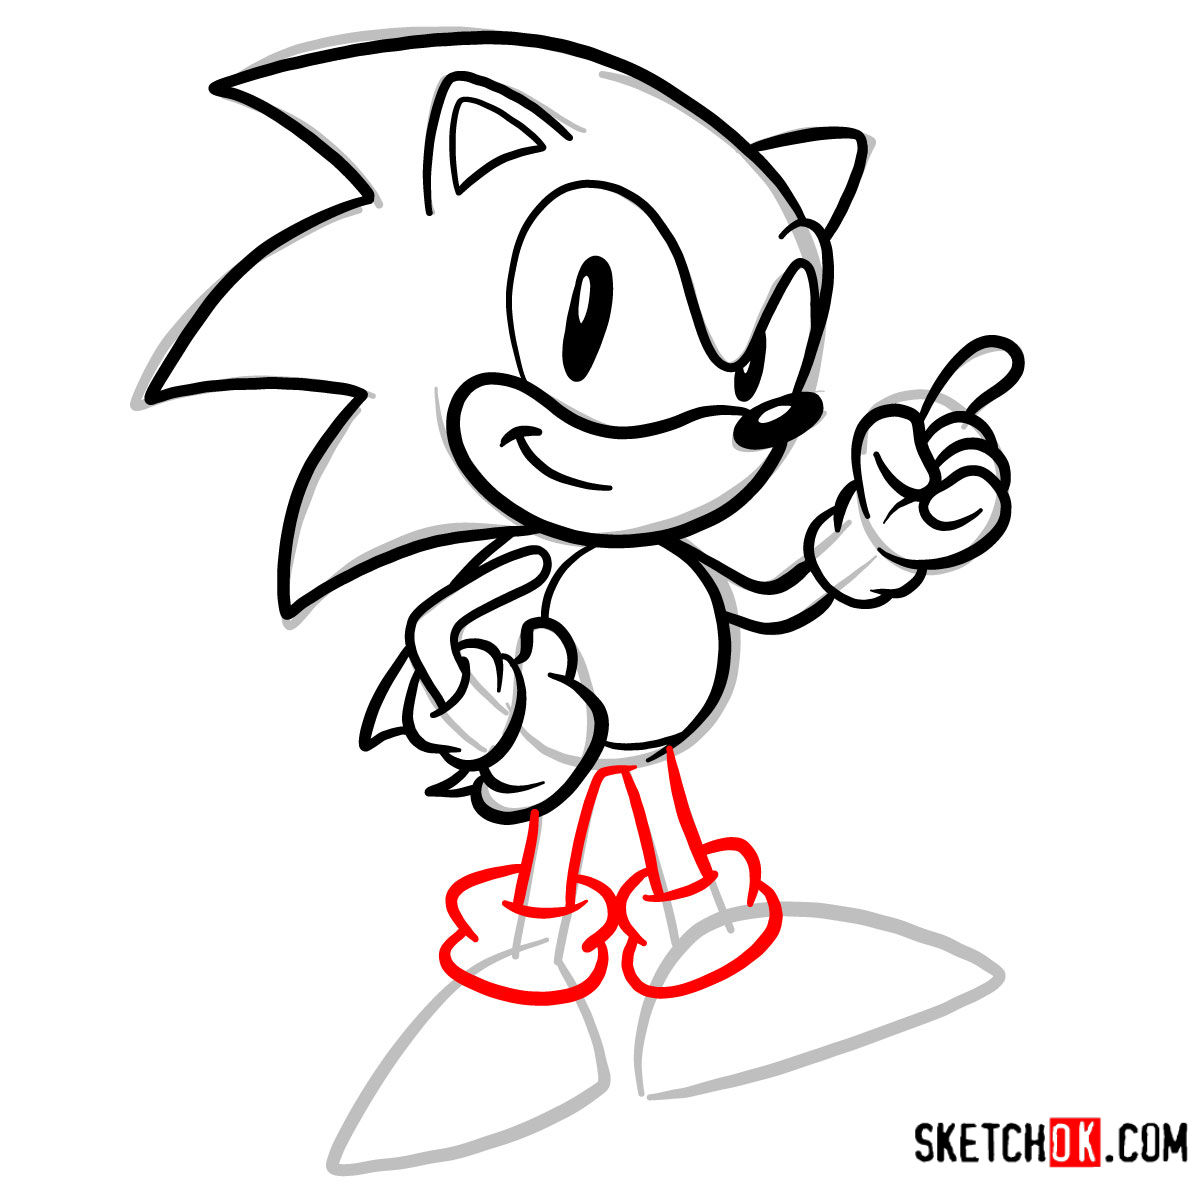 How To Draw Sonic The Hedgehog Sega Games Style Step By Step Drawing Tutorials